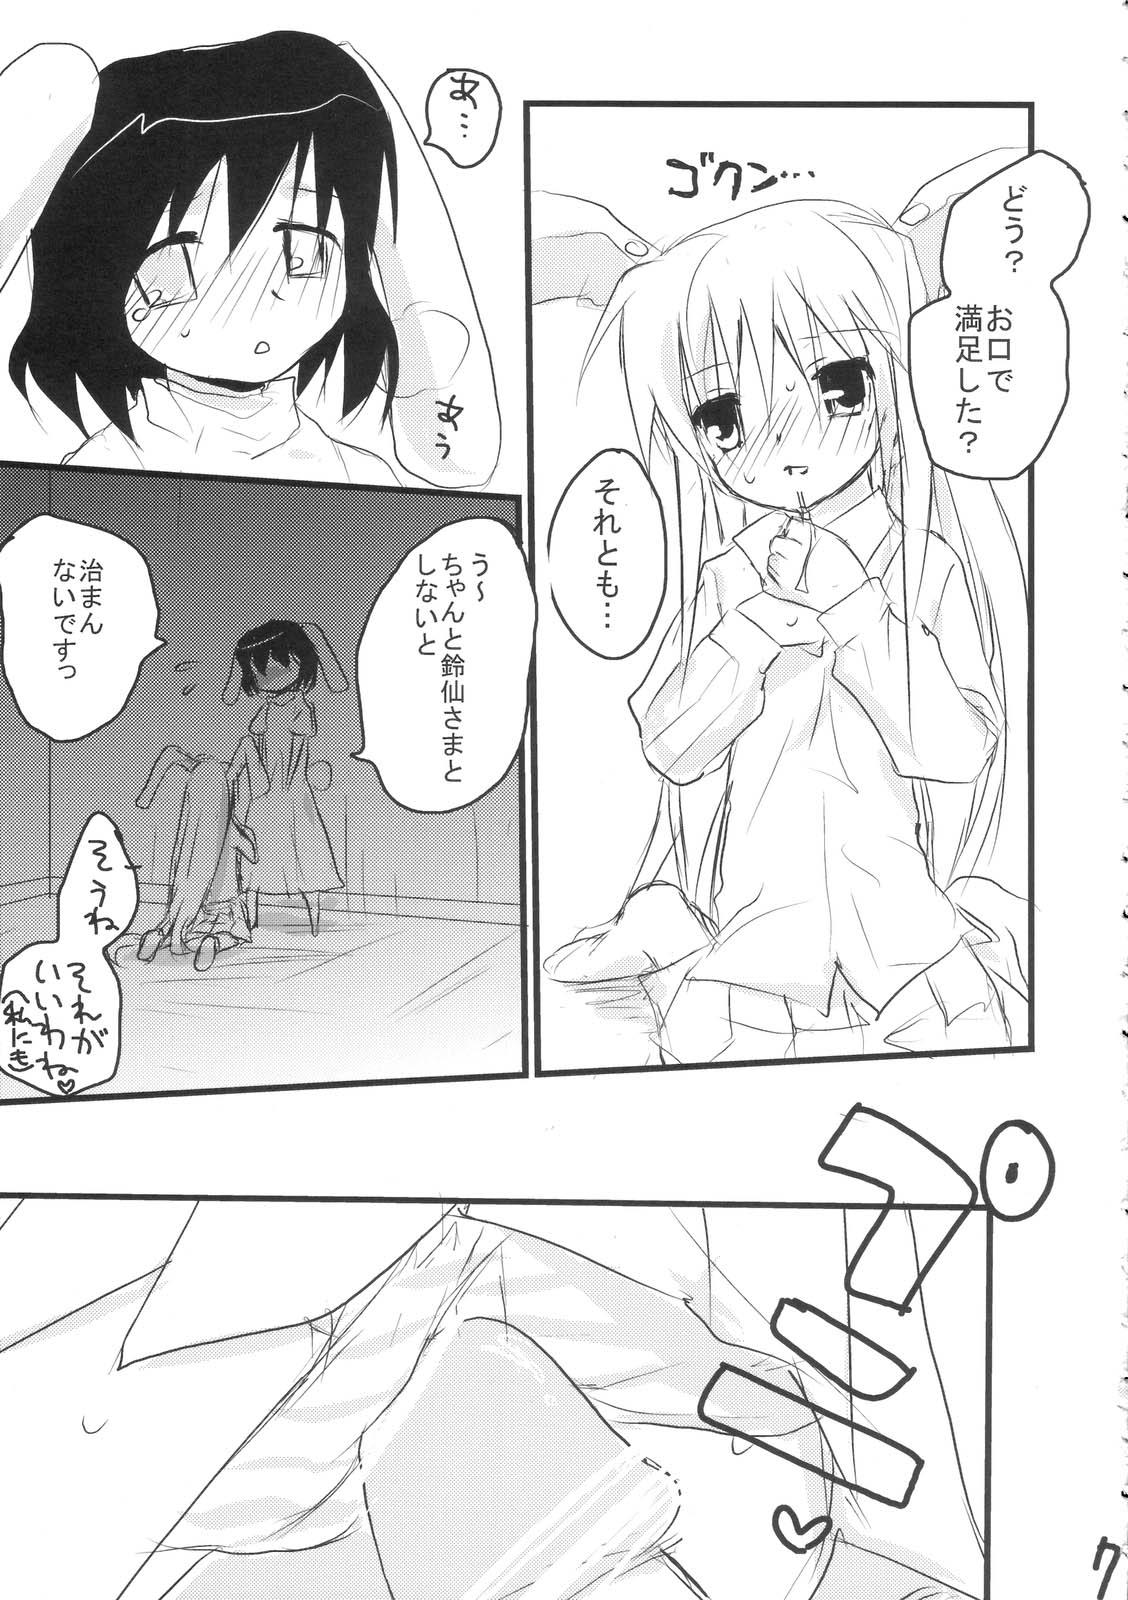 Hiddencam Uronge Ni - Touhou project Dominant - Page 6